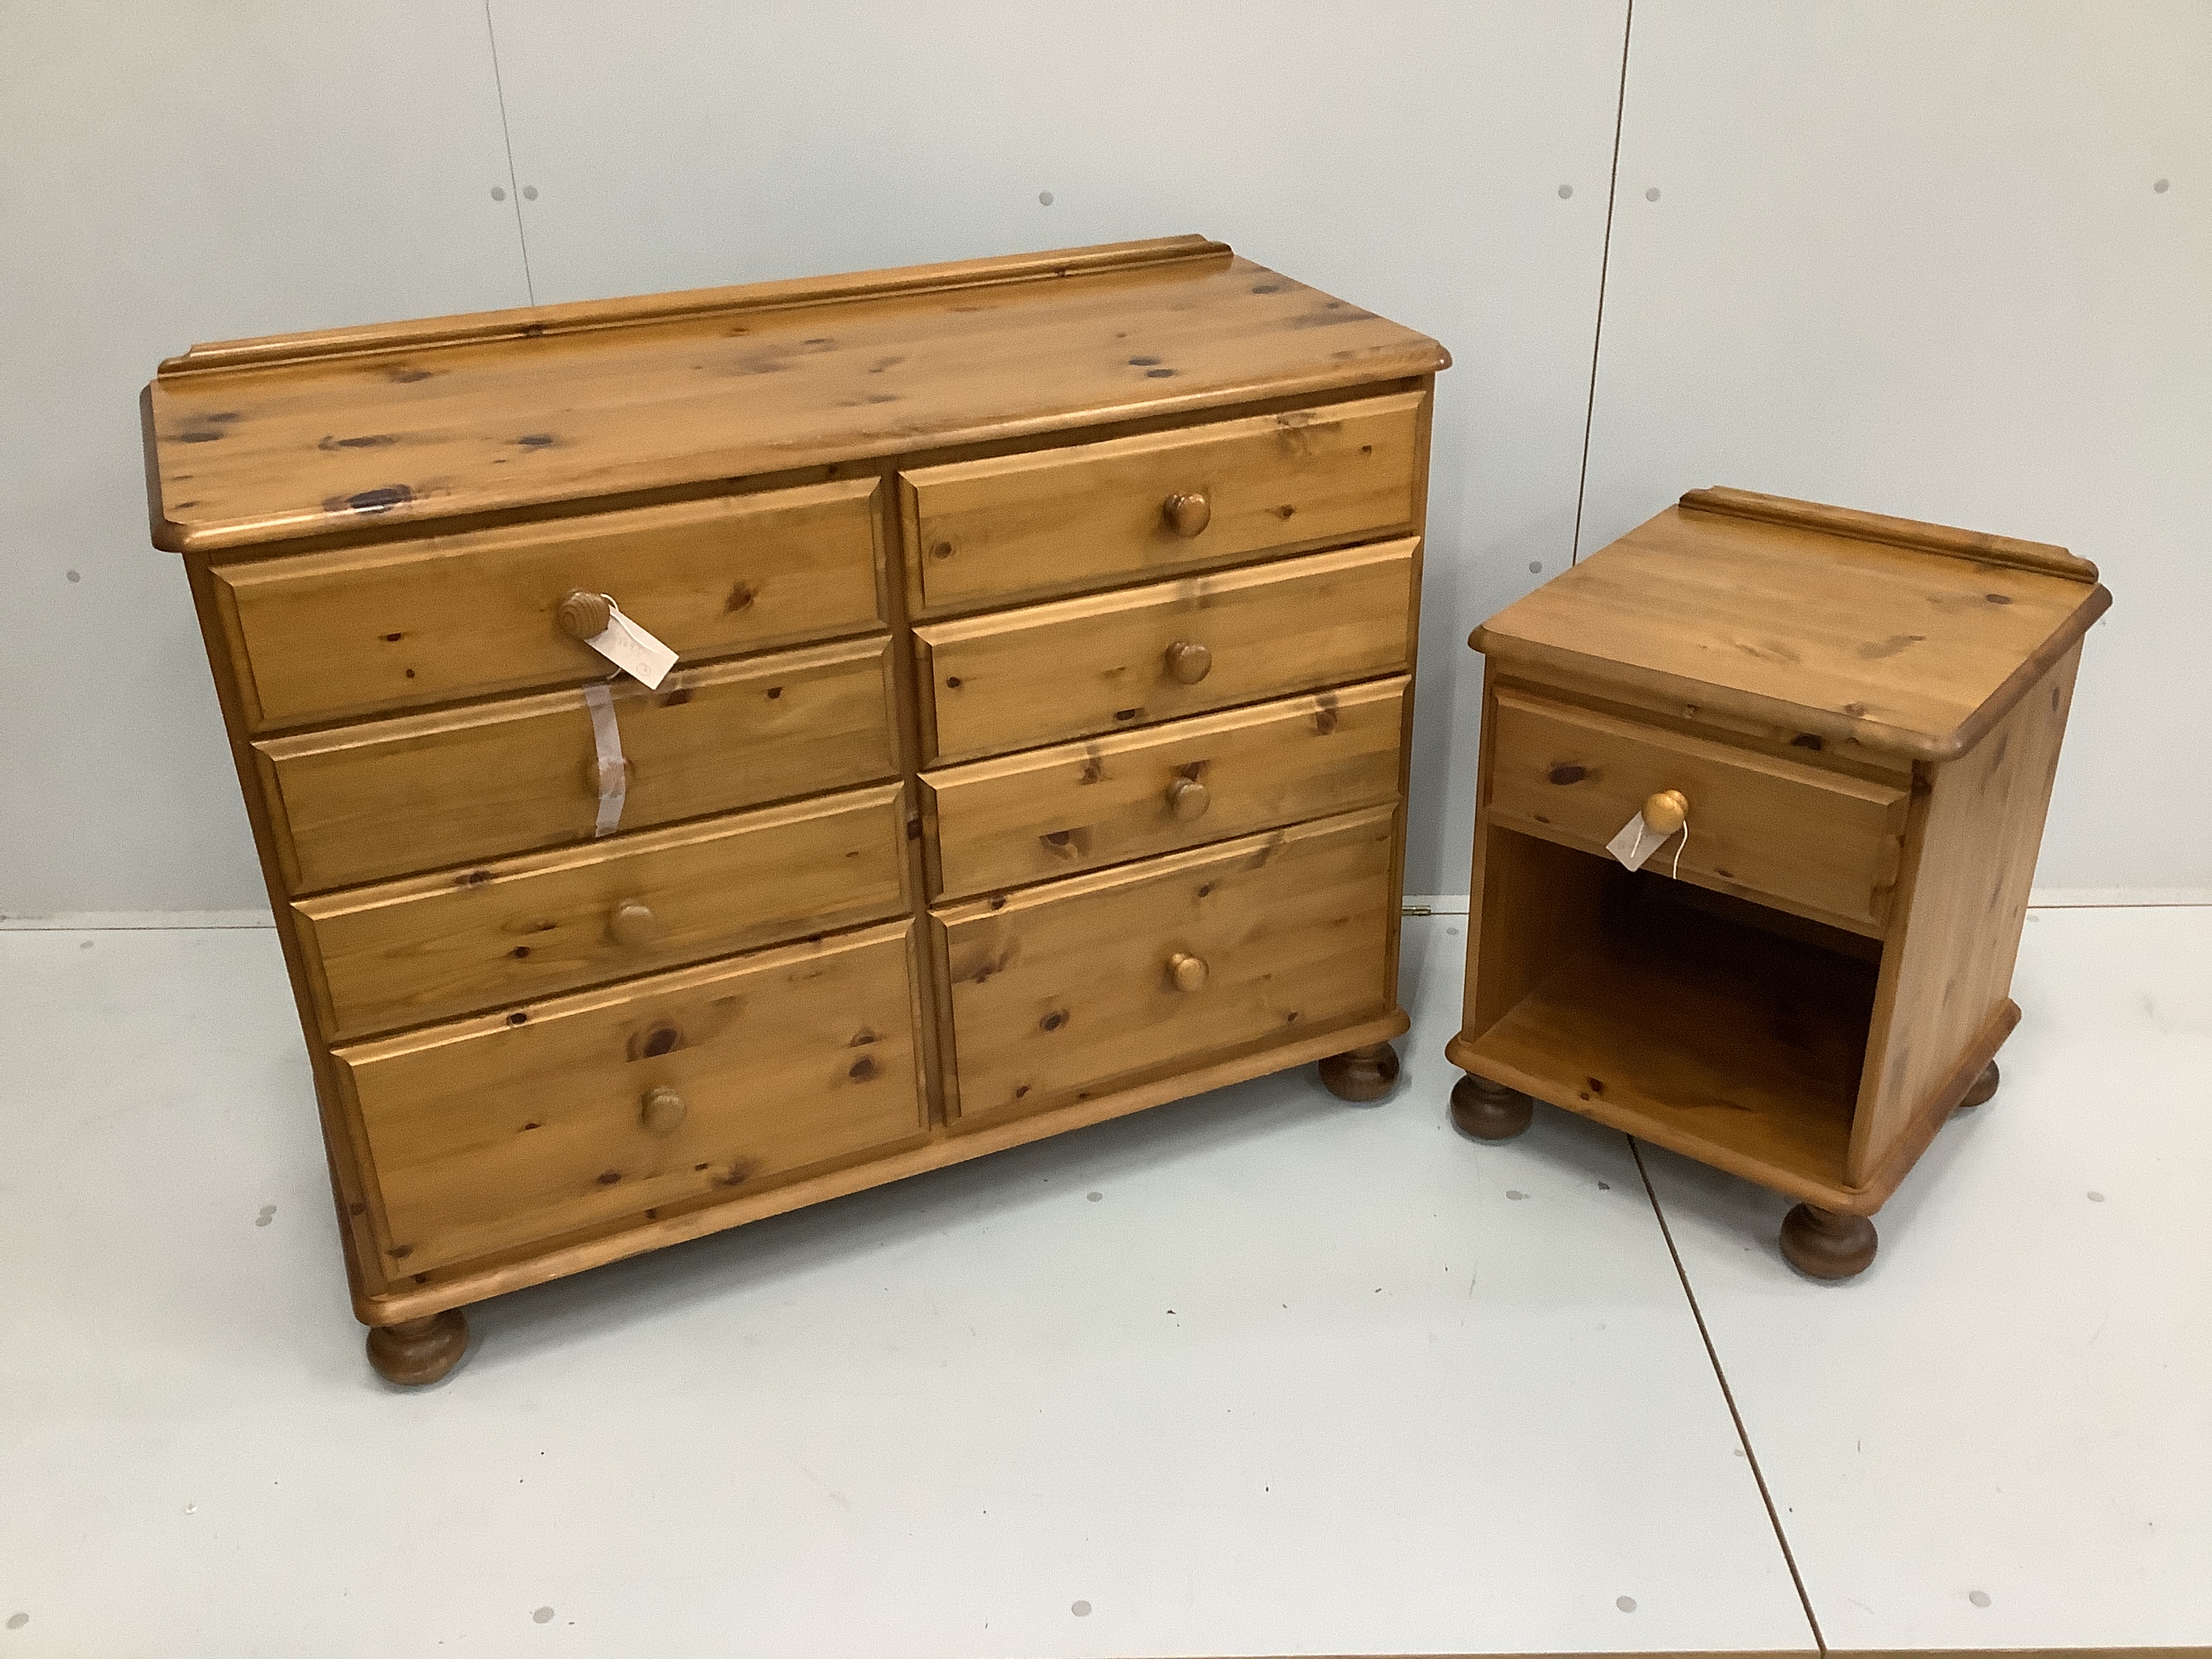 A 'Victoria' pine double chest with eight drawers, width 110cm, depth 45cm, height 76cm and a matching bedside chest